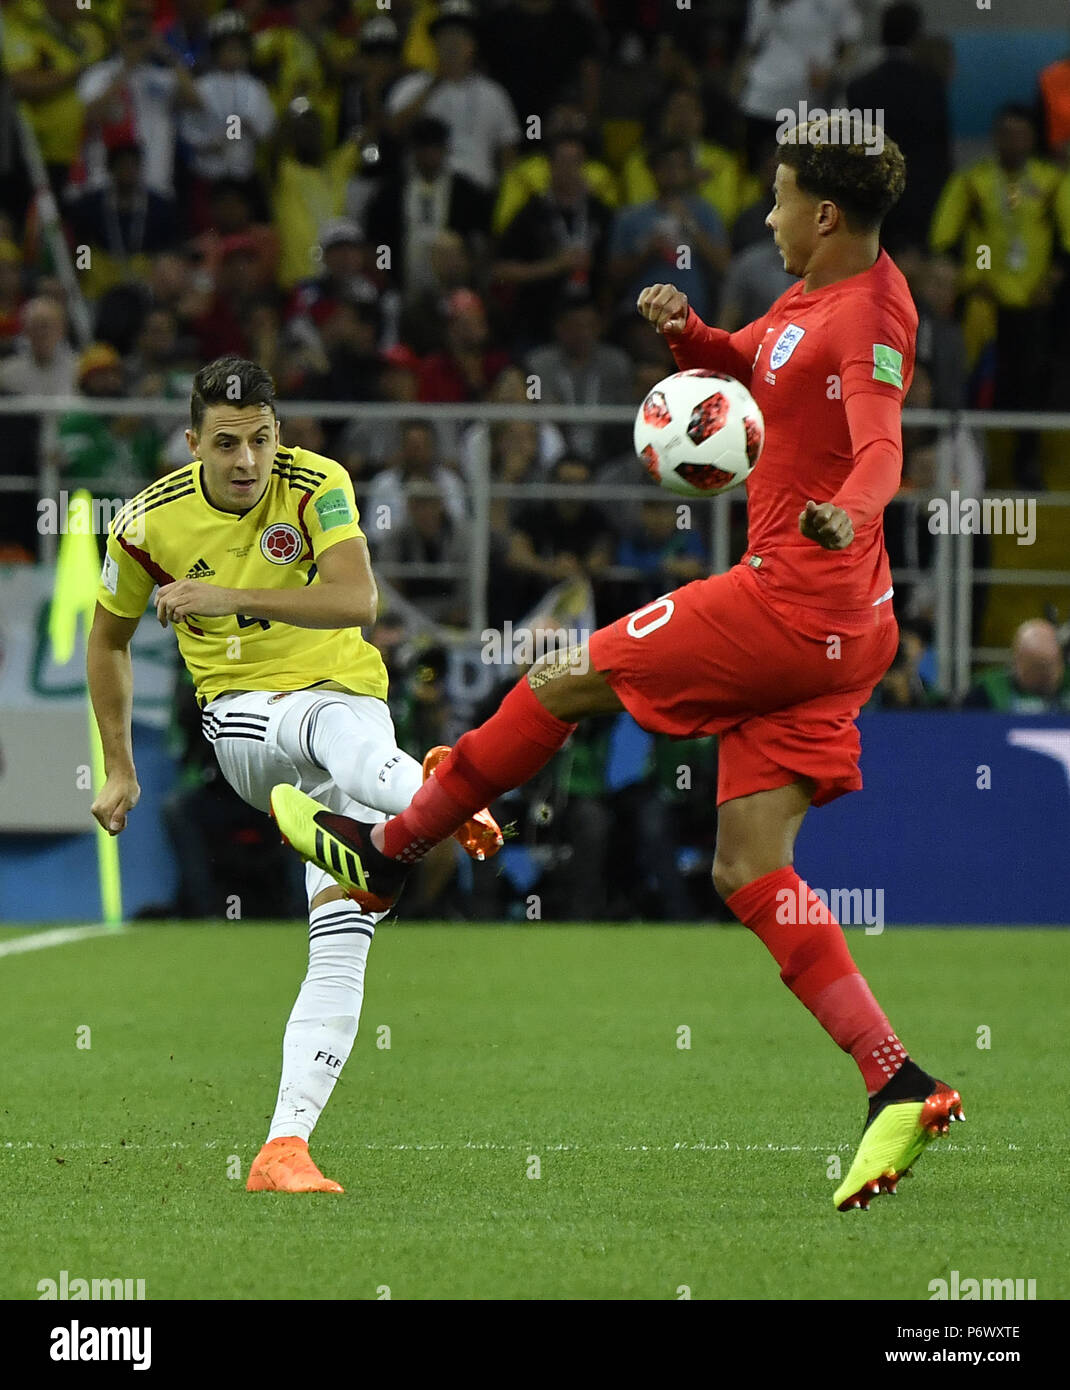 Moscow, Russia. 3rd July, 2018. Dele Alli (R) of England vies with Santiago Arias of Colombia during the 2018 FIFA World Cup round of 16 match between England and Colombia in Moscow, Russia, July 3, 2018. Credit: He Canling/Xinhua/Alamy Live News Stock Photo